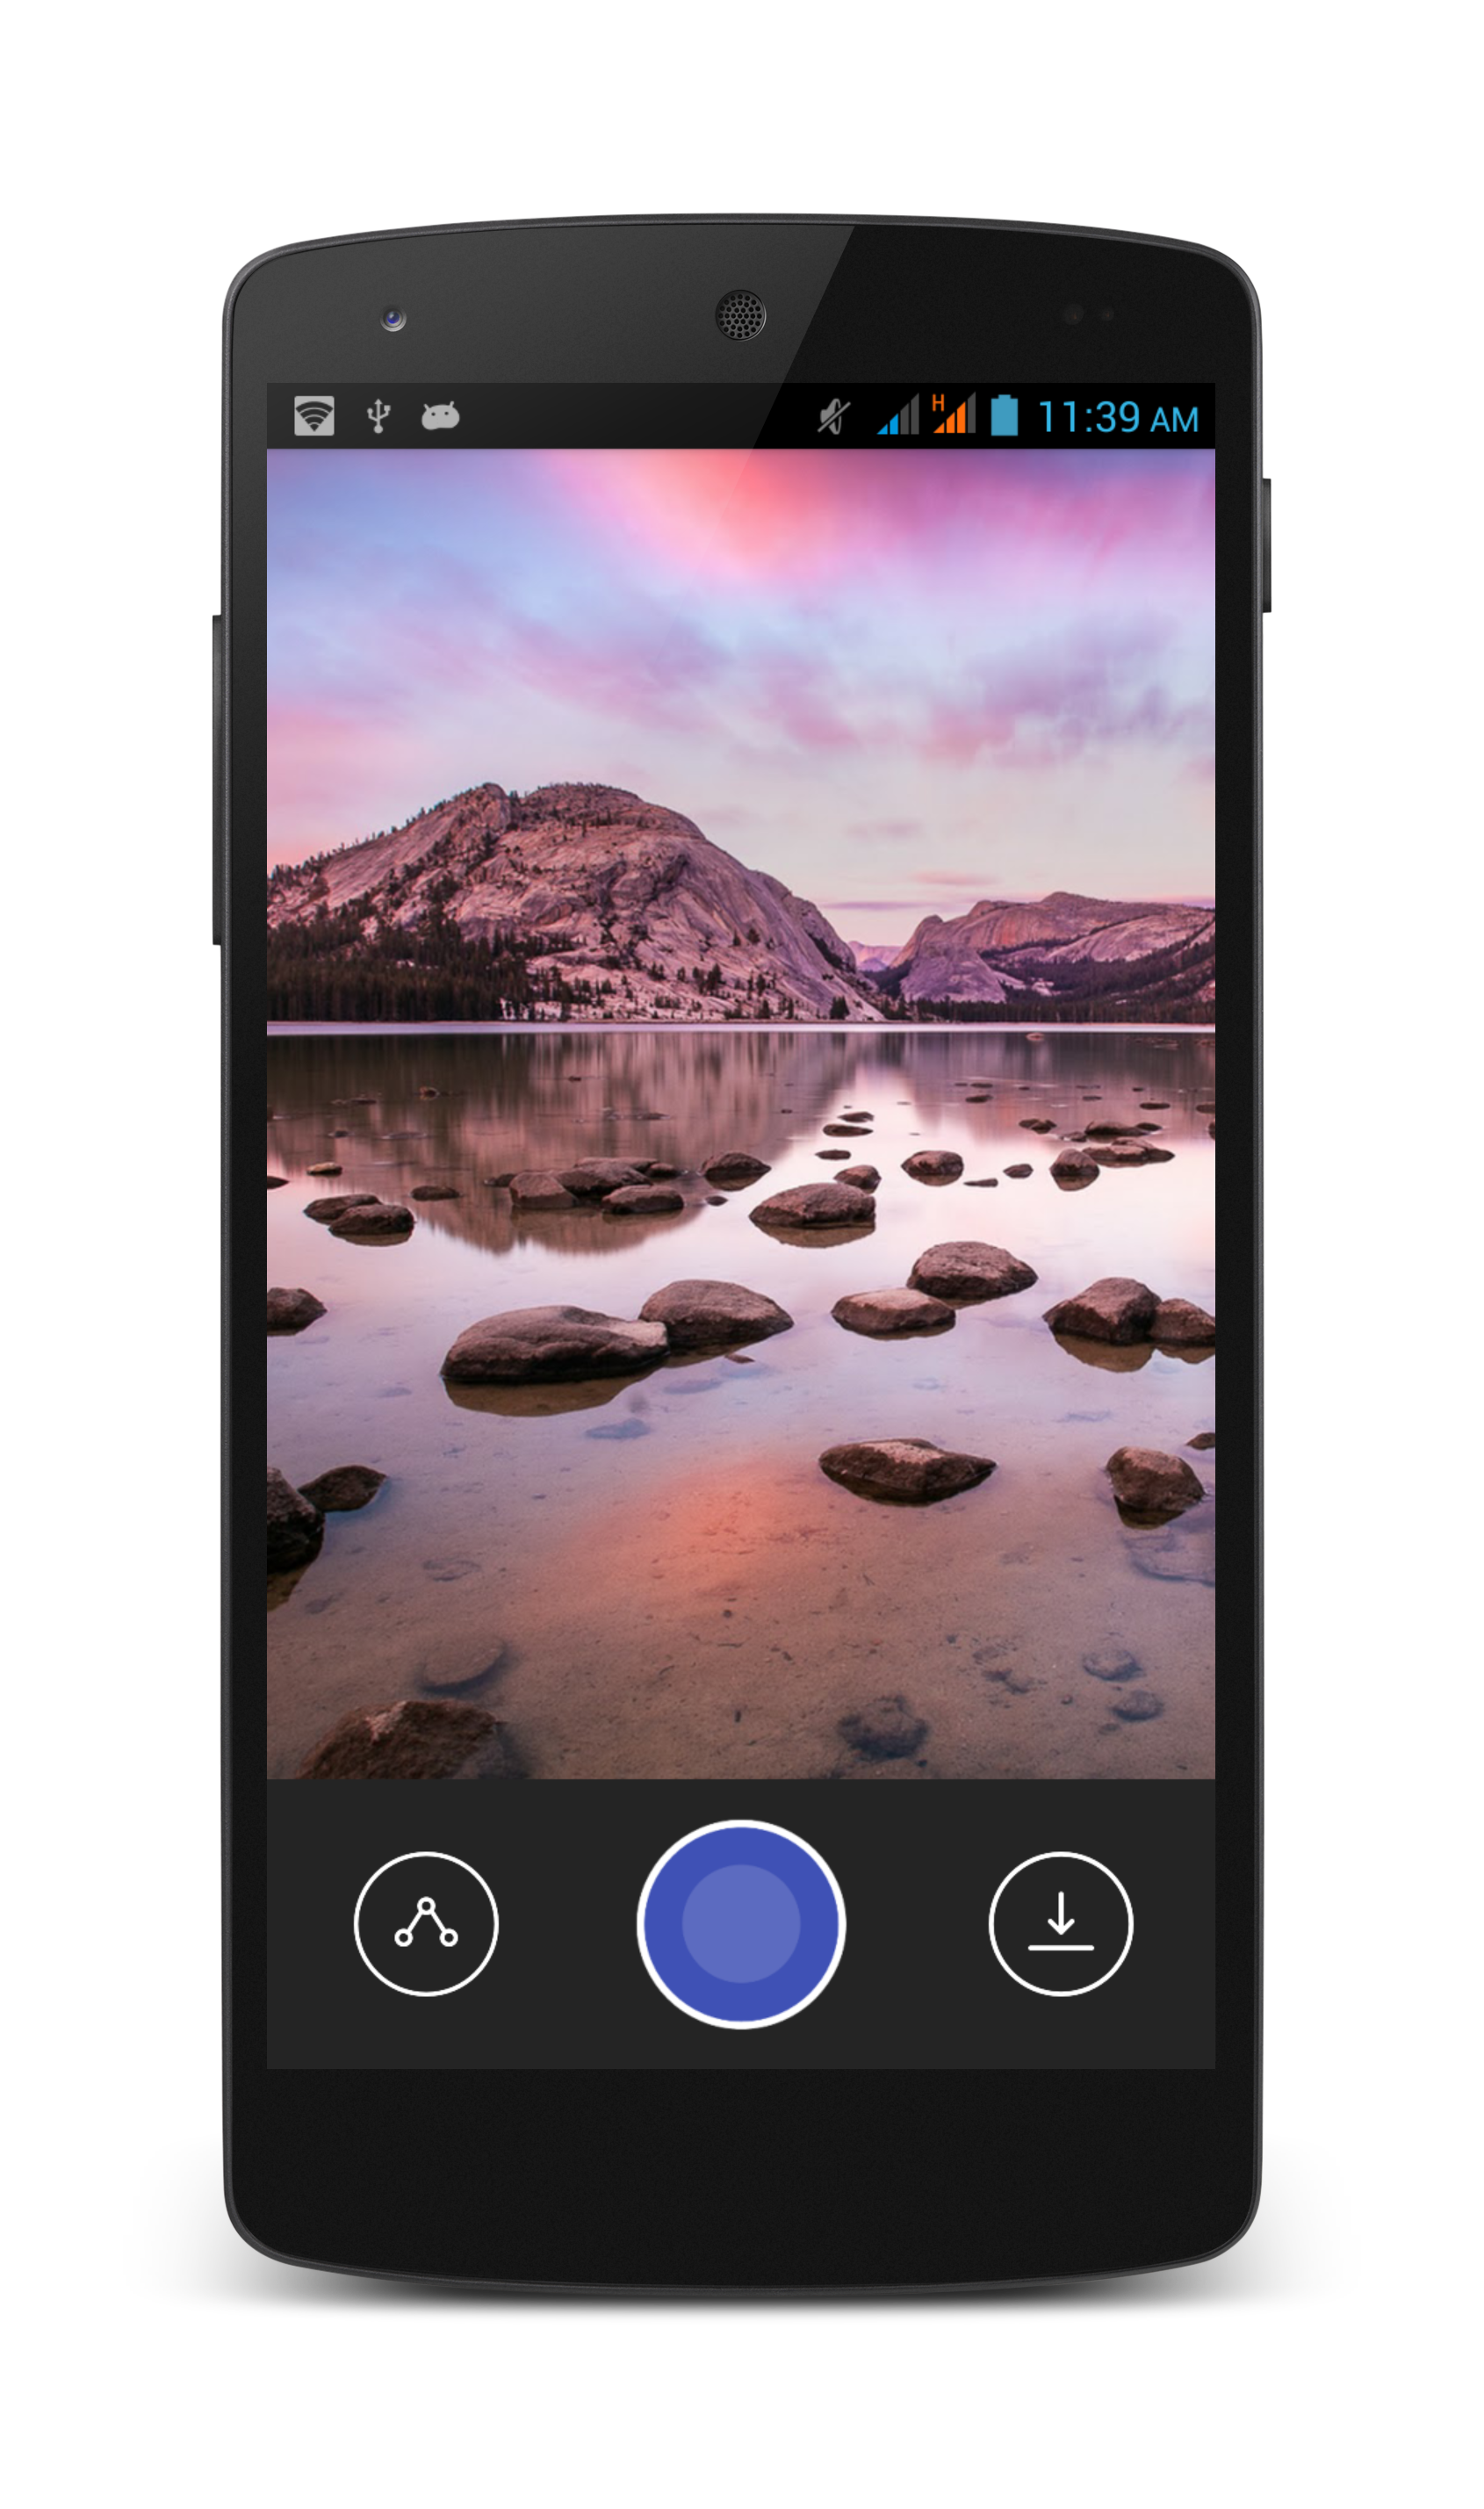 Official Beautiful Chromecast Wallpaper For Your Android